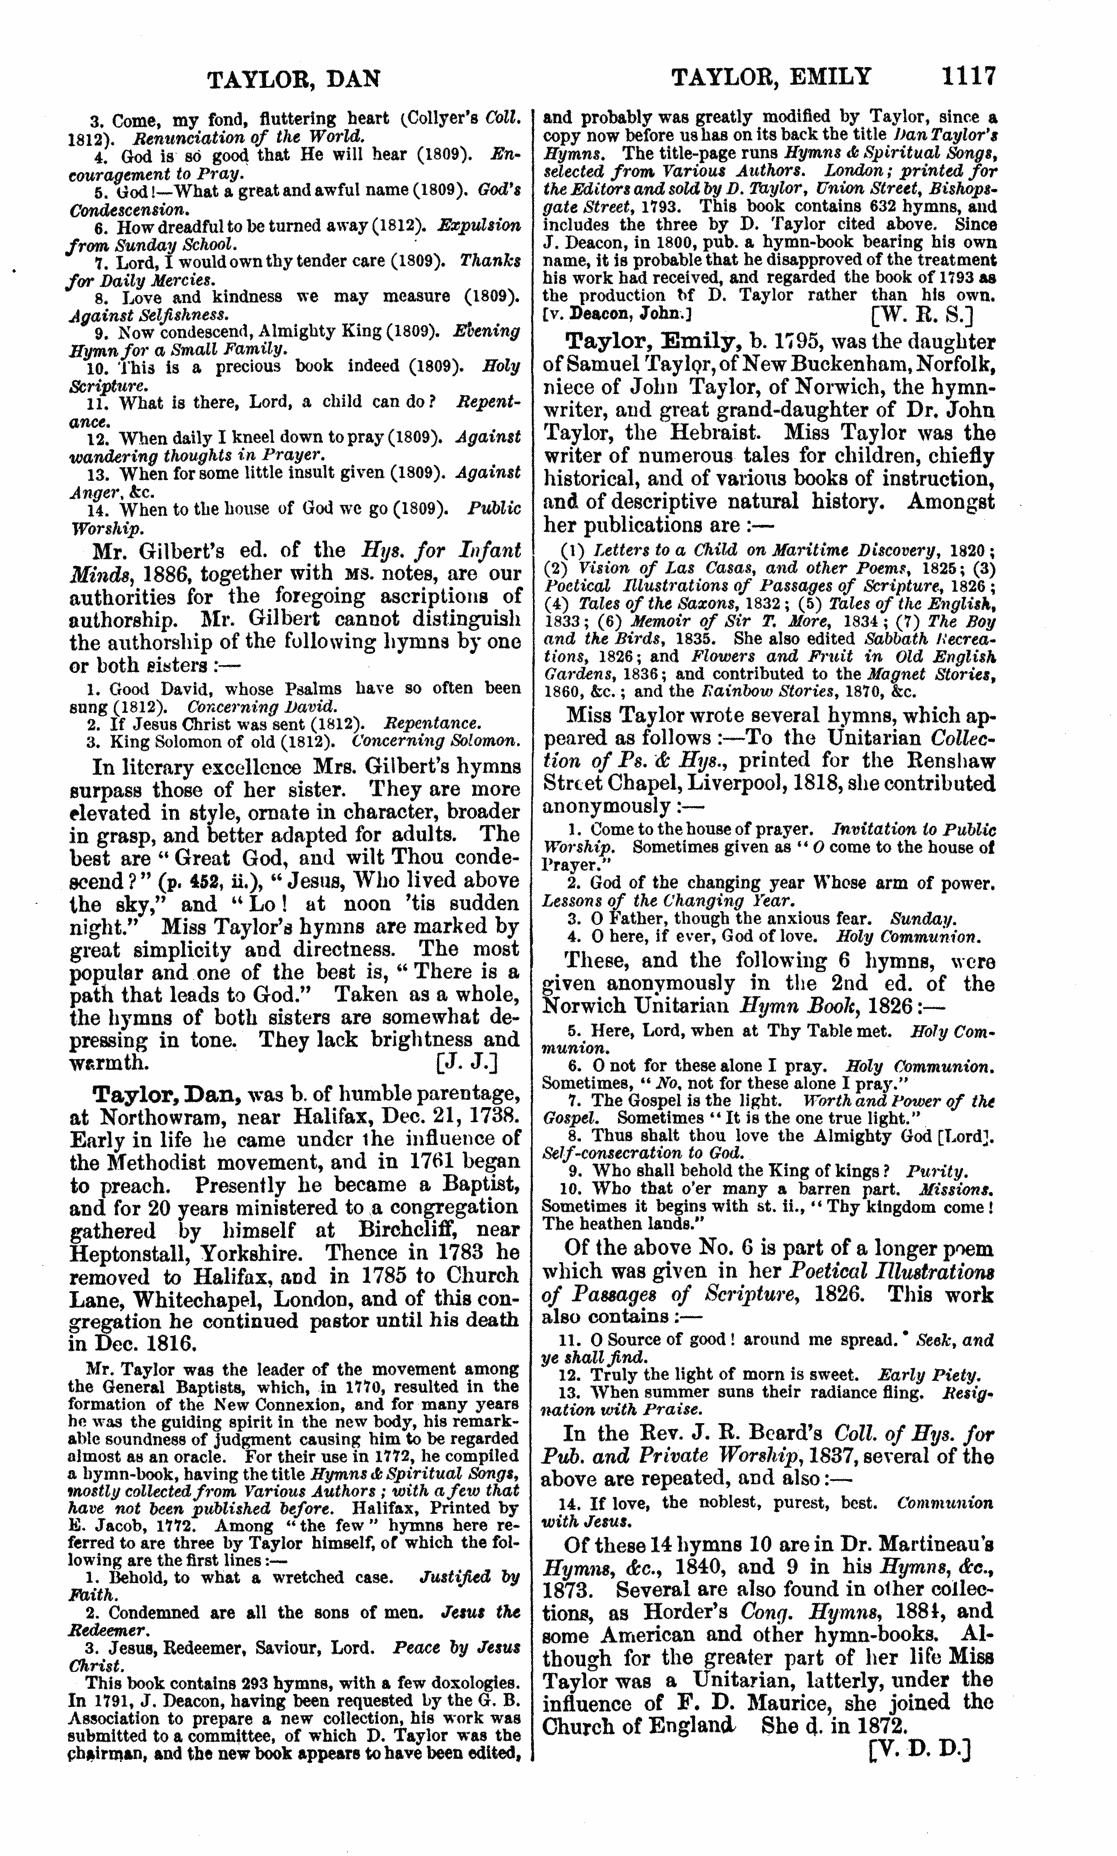 Image of page 1117